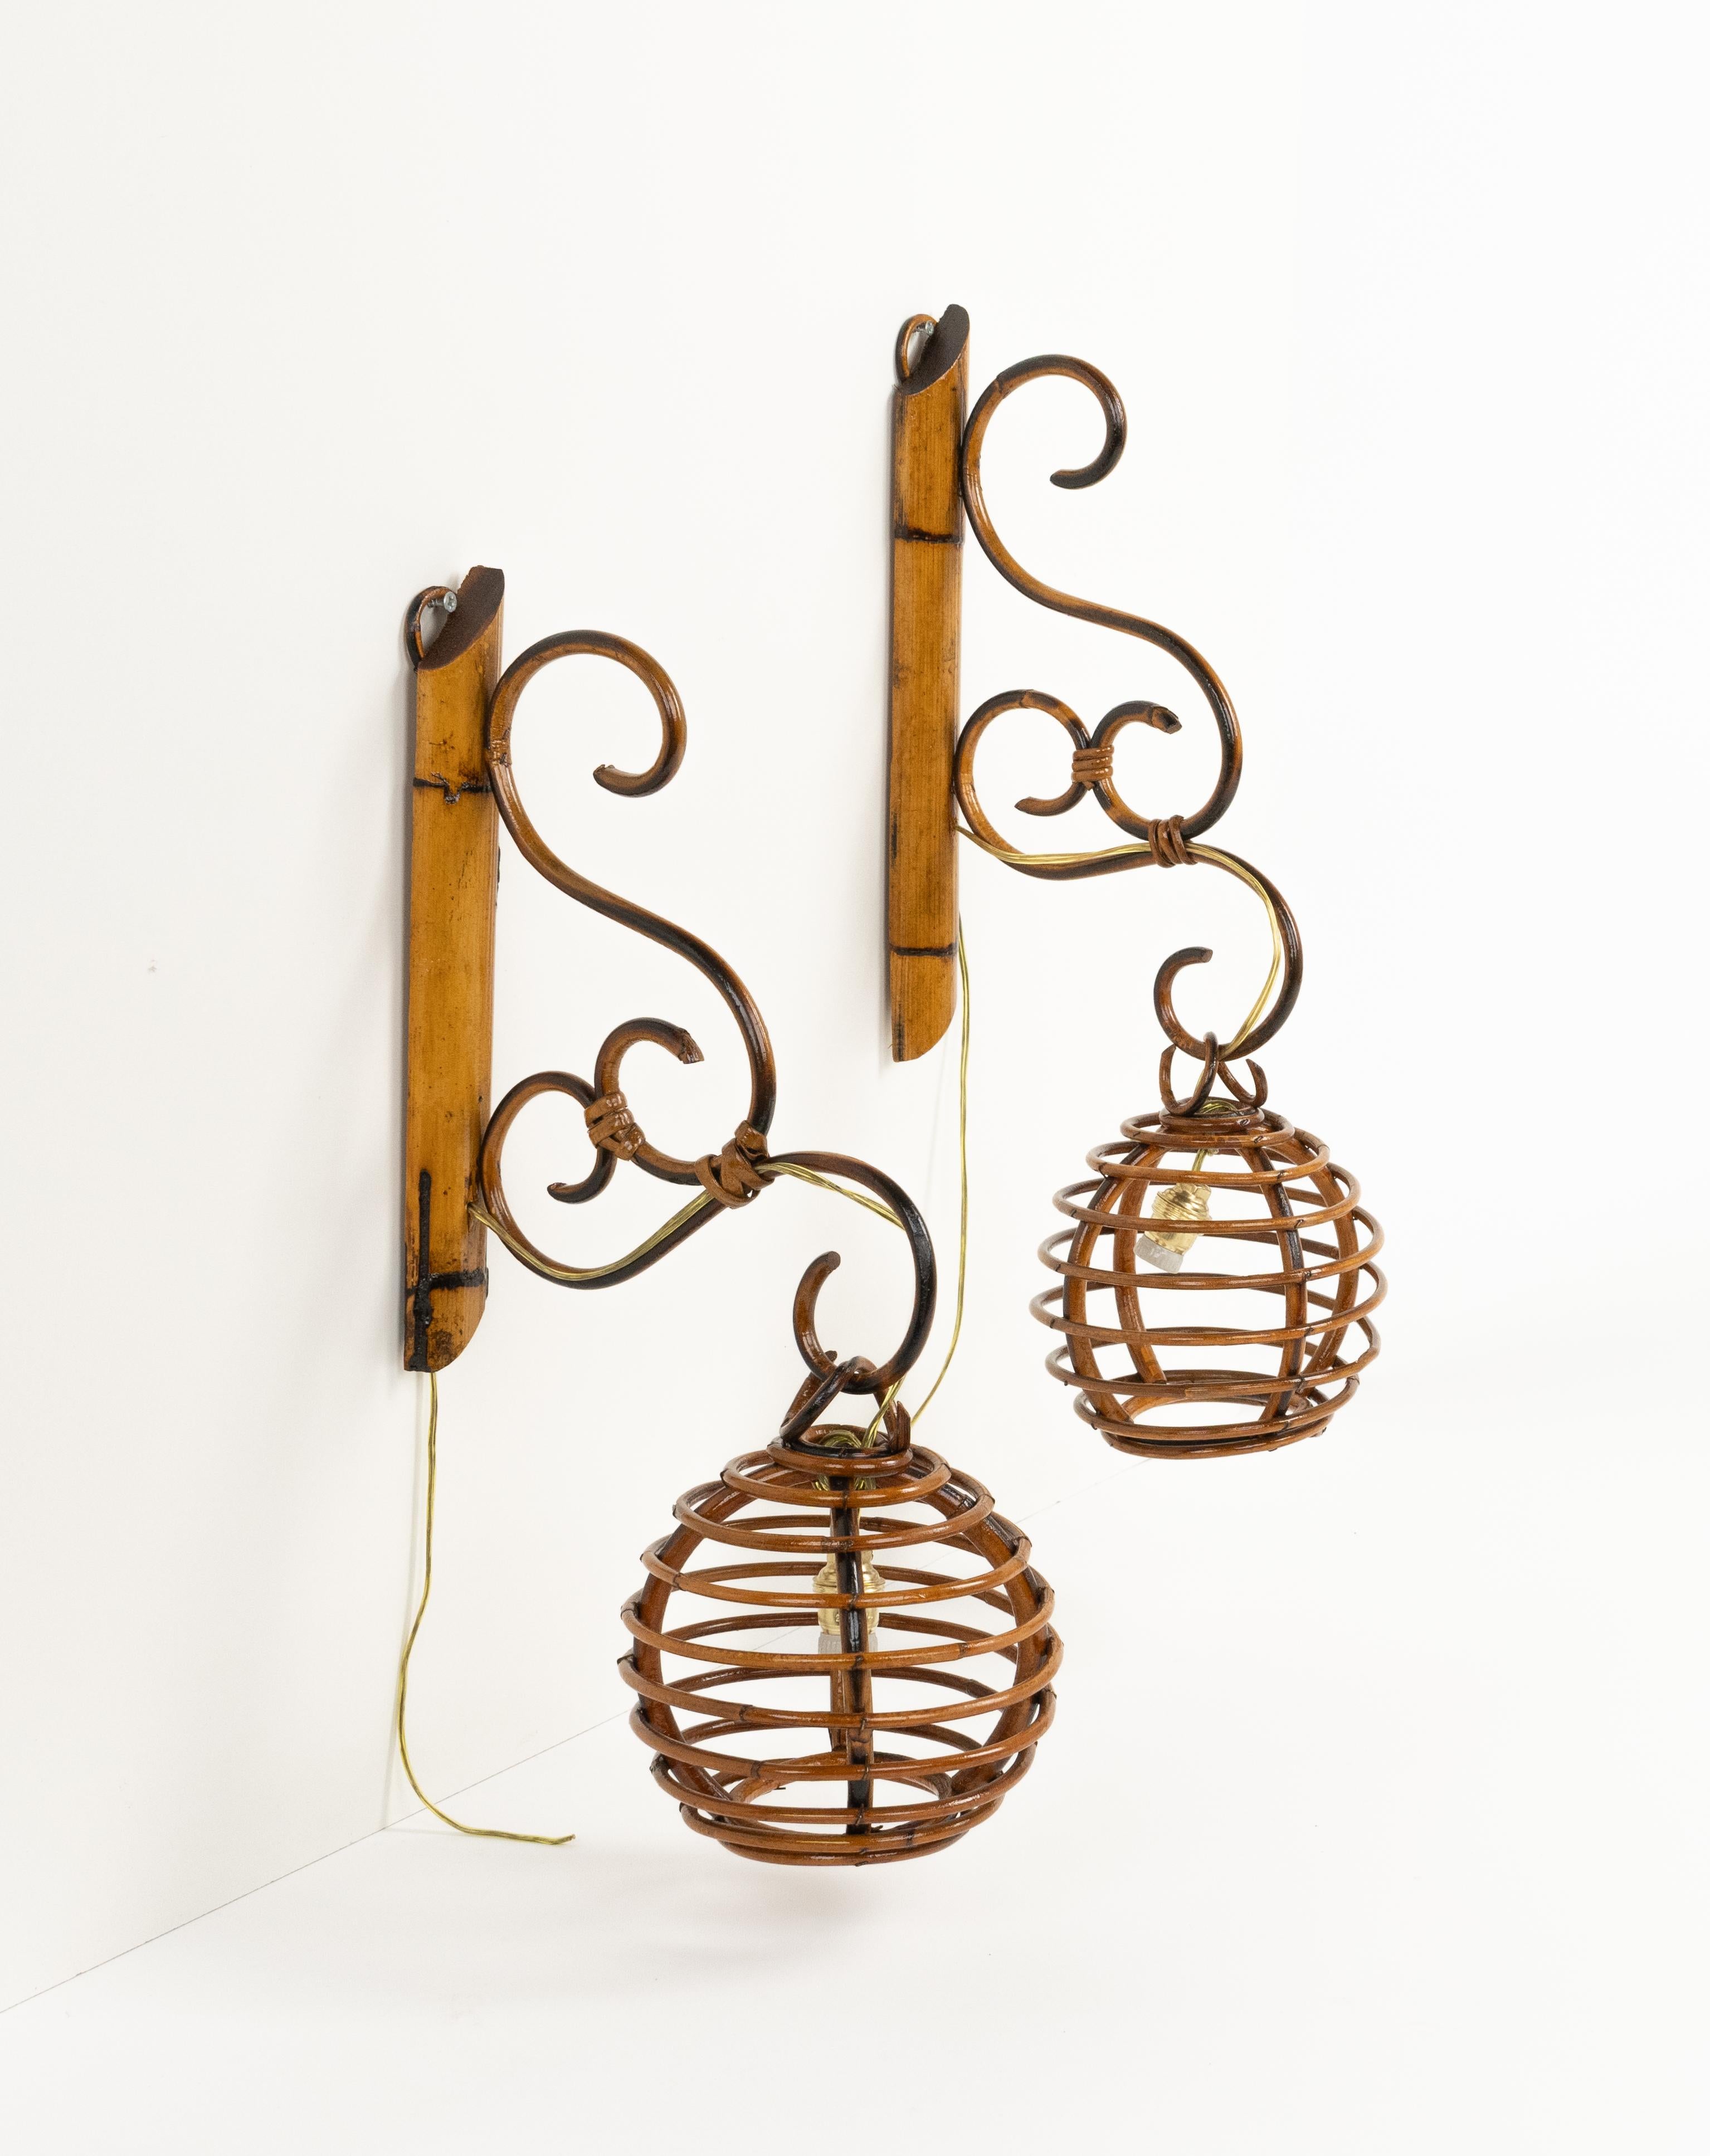 Midcentury Pair of Sconces in Bamboo and Rattan Louis Sognot Style, Italy 1960s For Sale 4